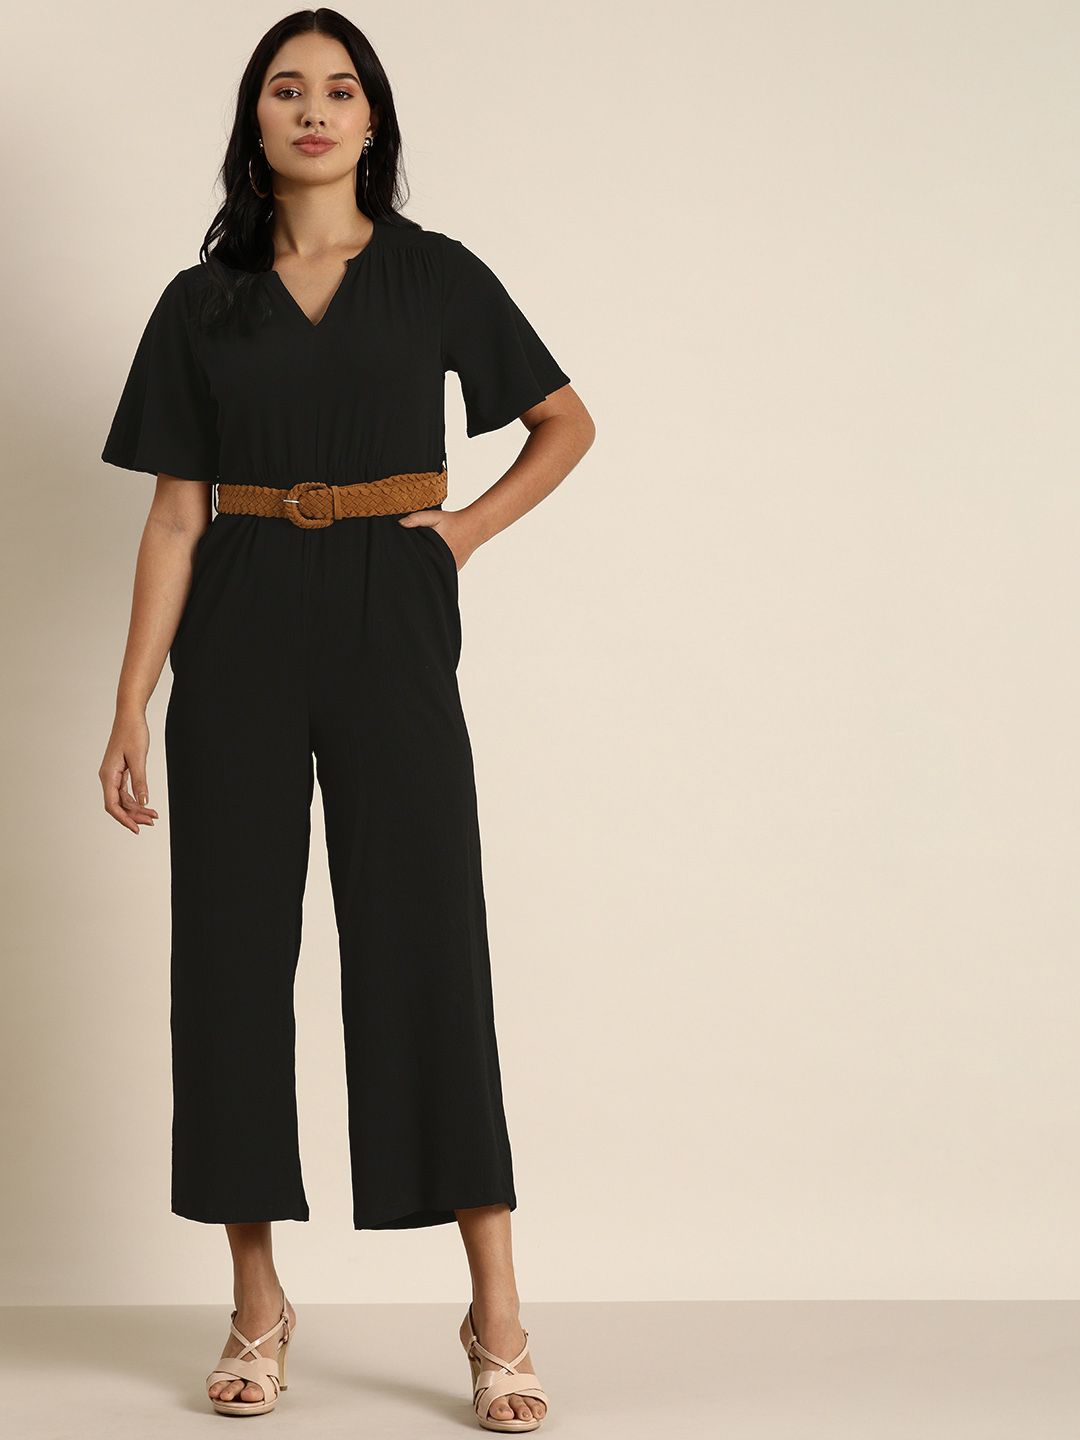 all about you Black Solid Basic Jumpsuit Price in India